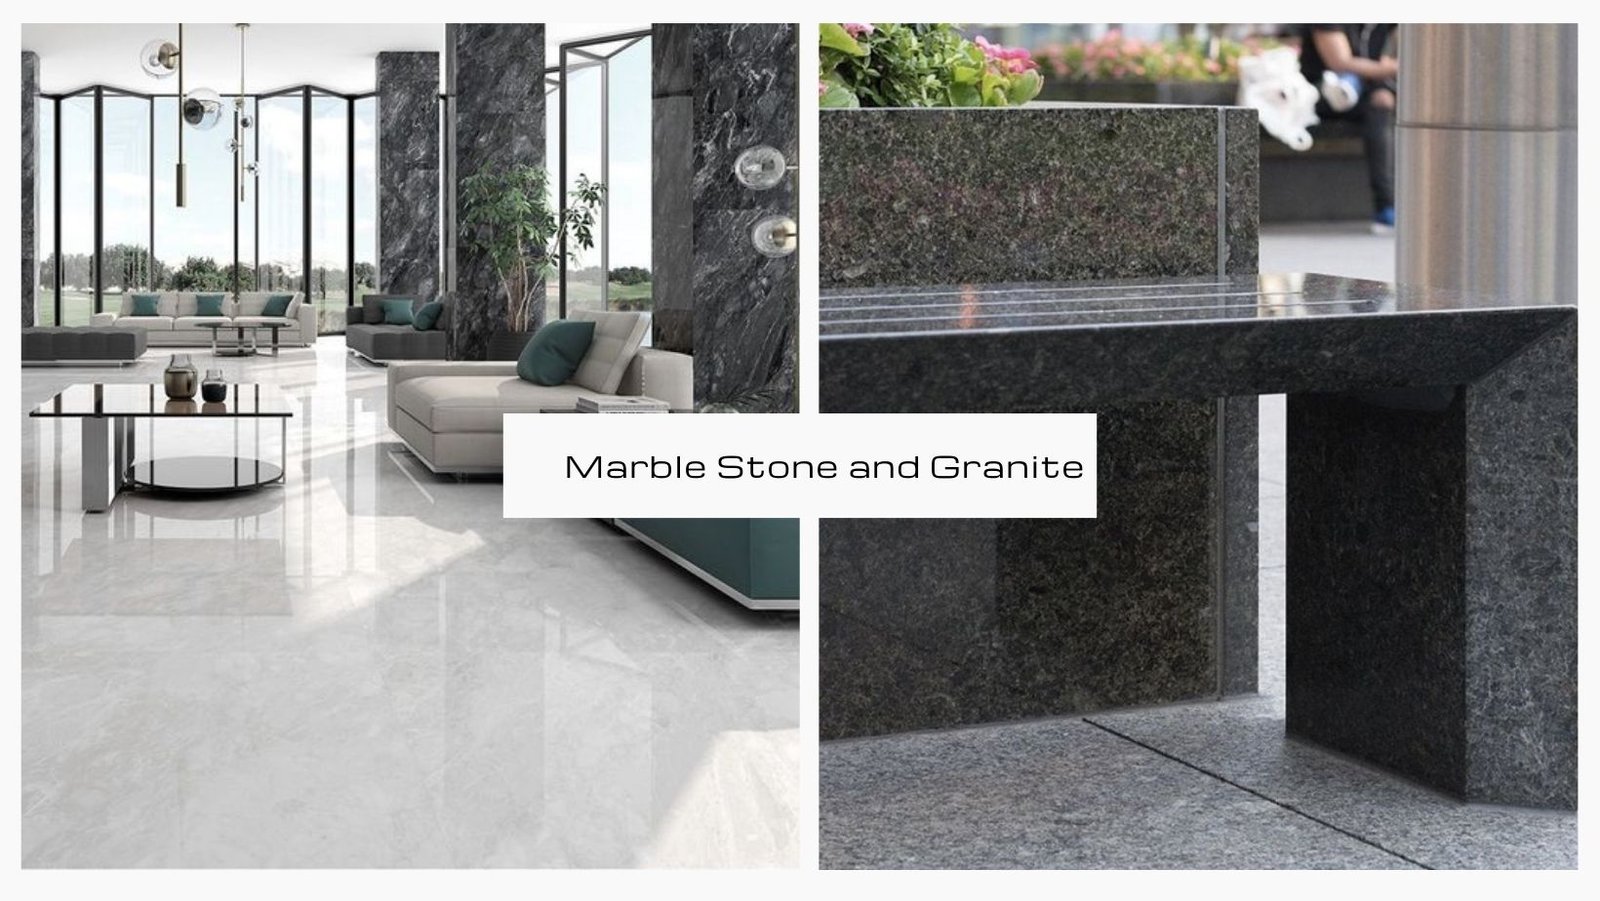 Marble Stone and Granite: A Comprehensive Guide